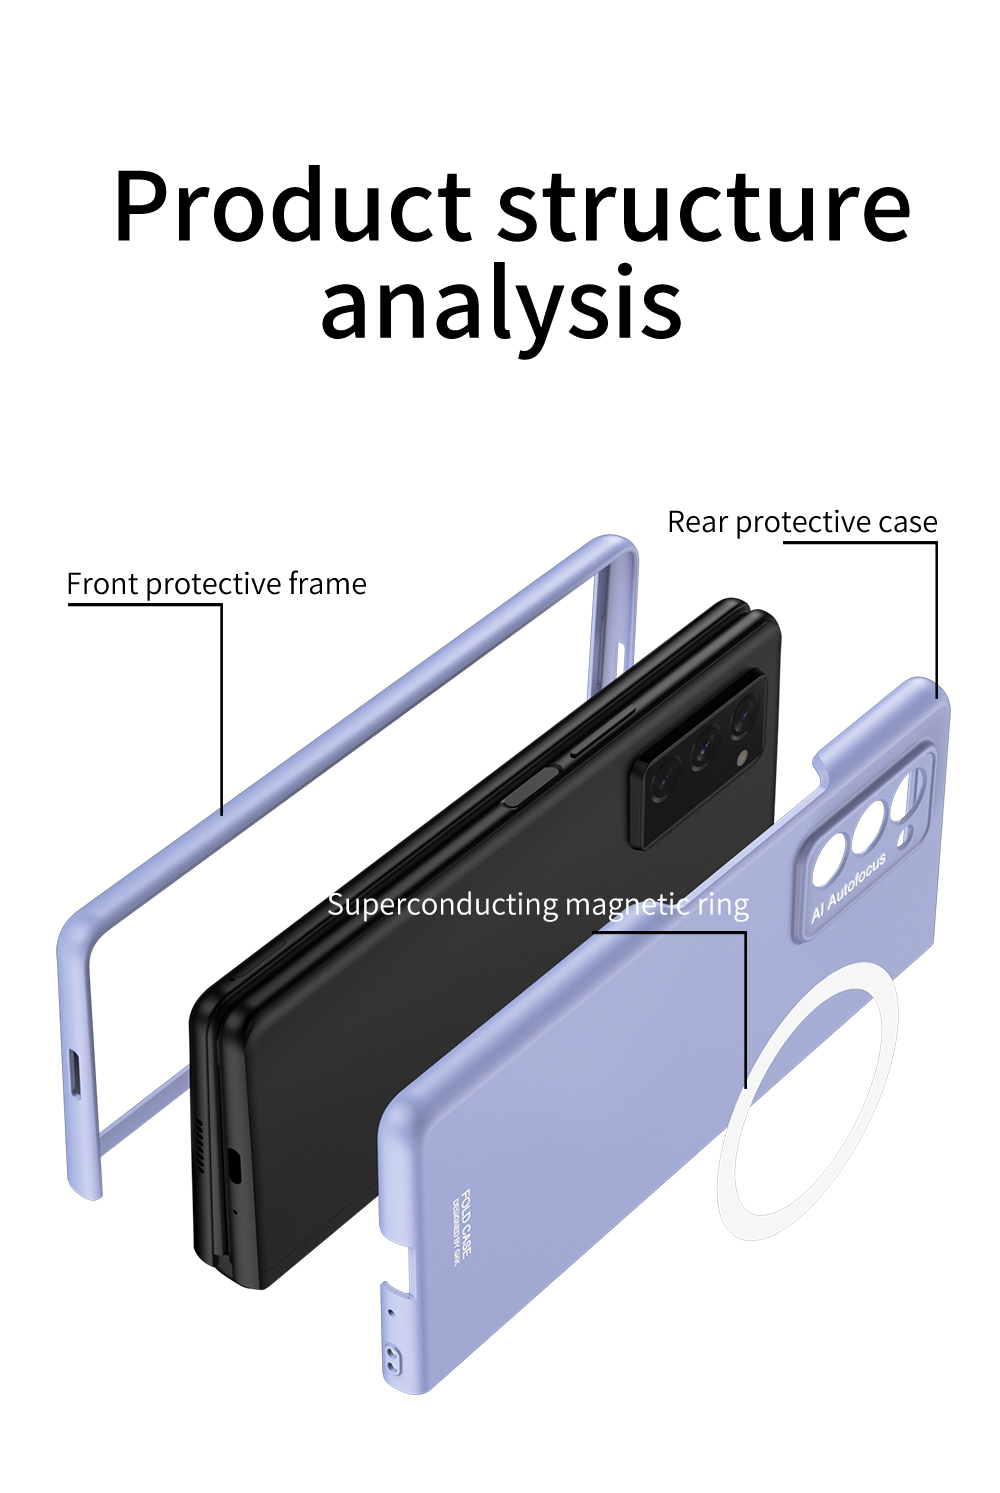 Samsung Galaxy Z Fold 2 Case Matte Shell Hard Protection Coverの磁気ワイヤレス充電器のケース